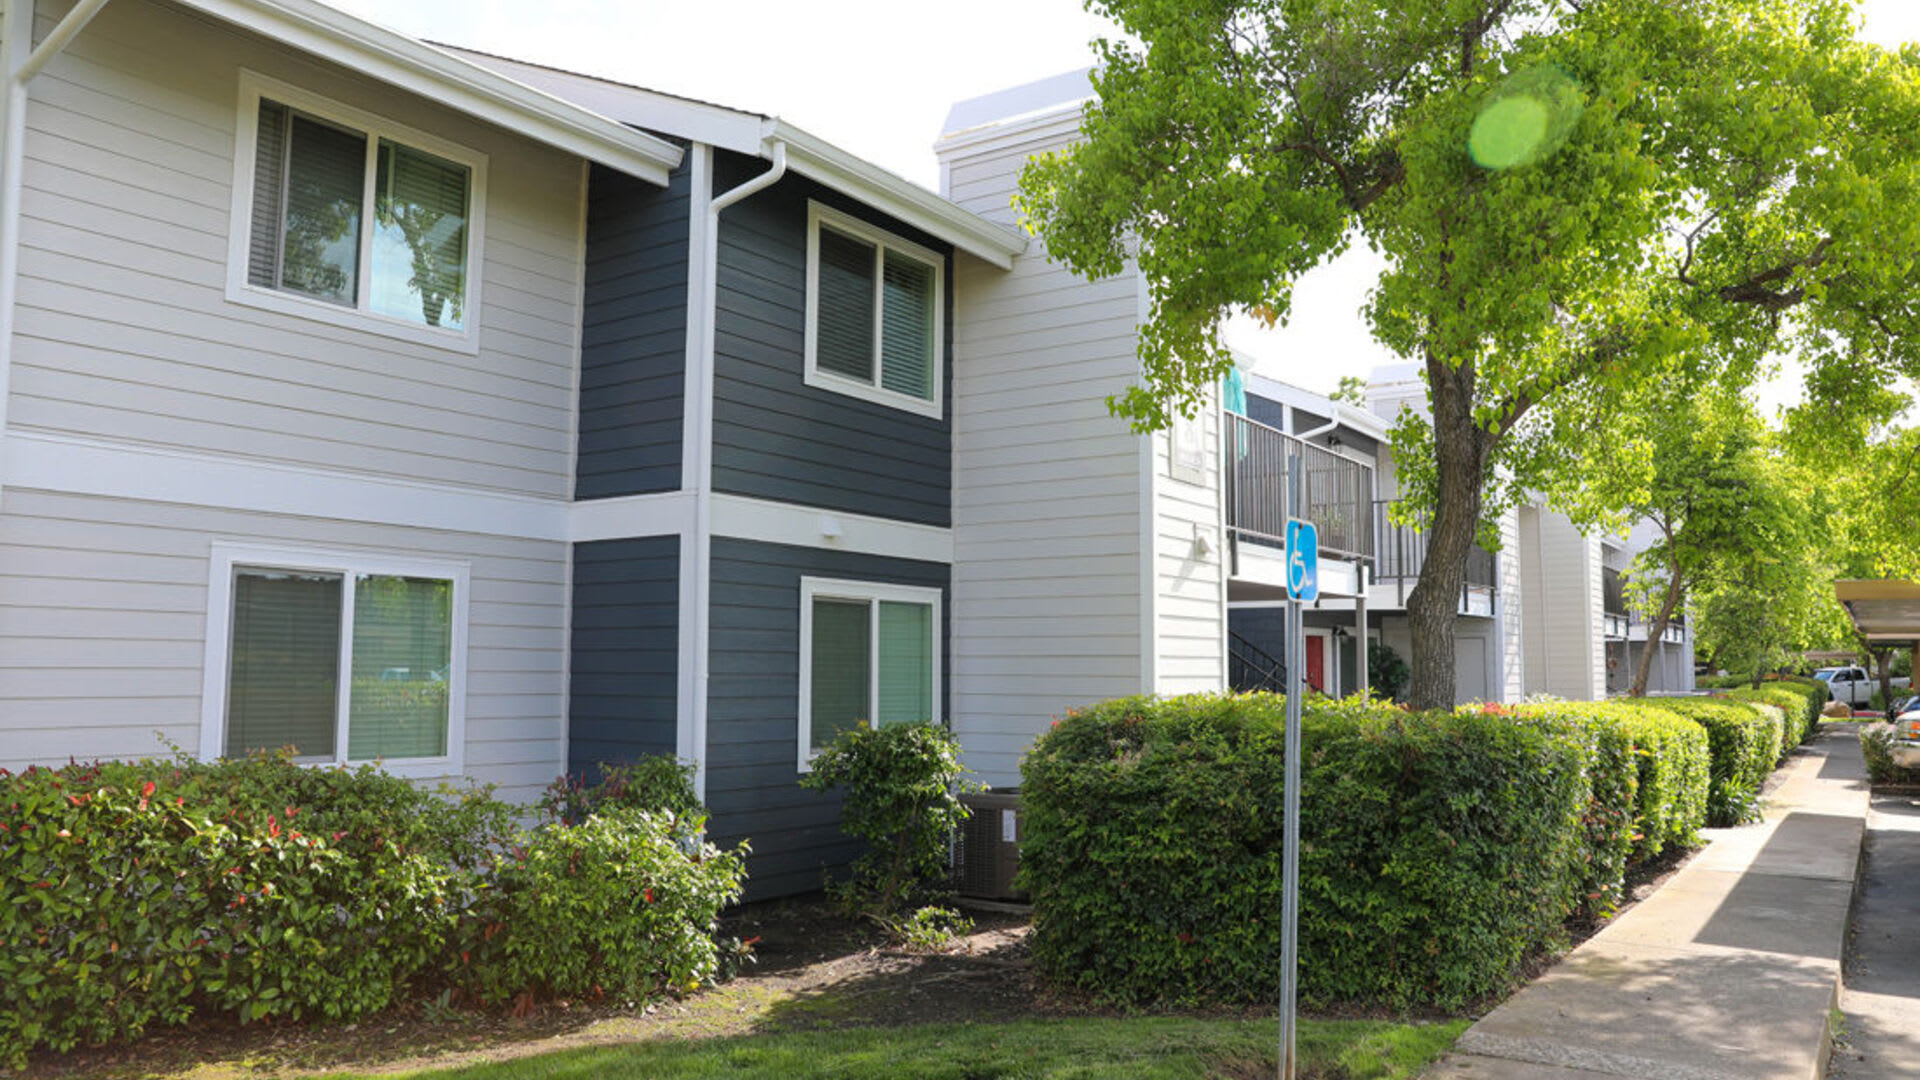 Exterior view of the apartments at Lake Pointe Apartments in Folsom, California